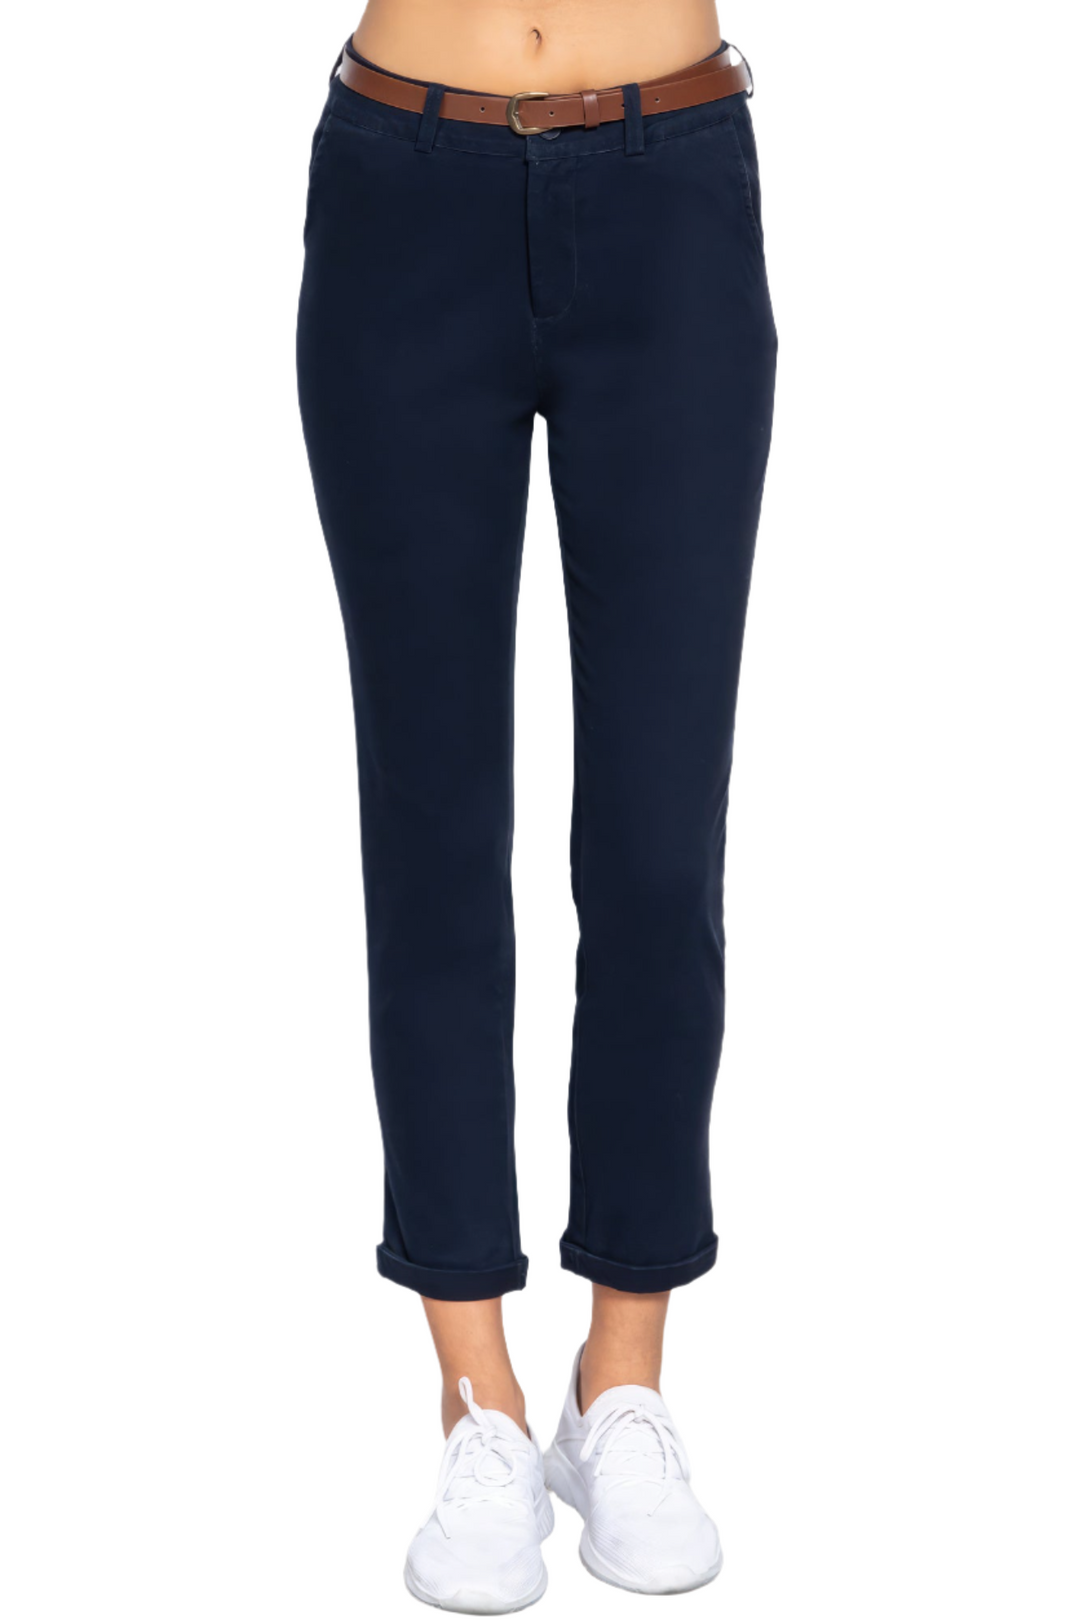 Cotton-span Twill Belted Long Pants: Women's Stretch Dark Navy Trousers with Belt